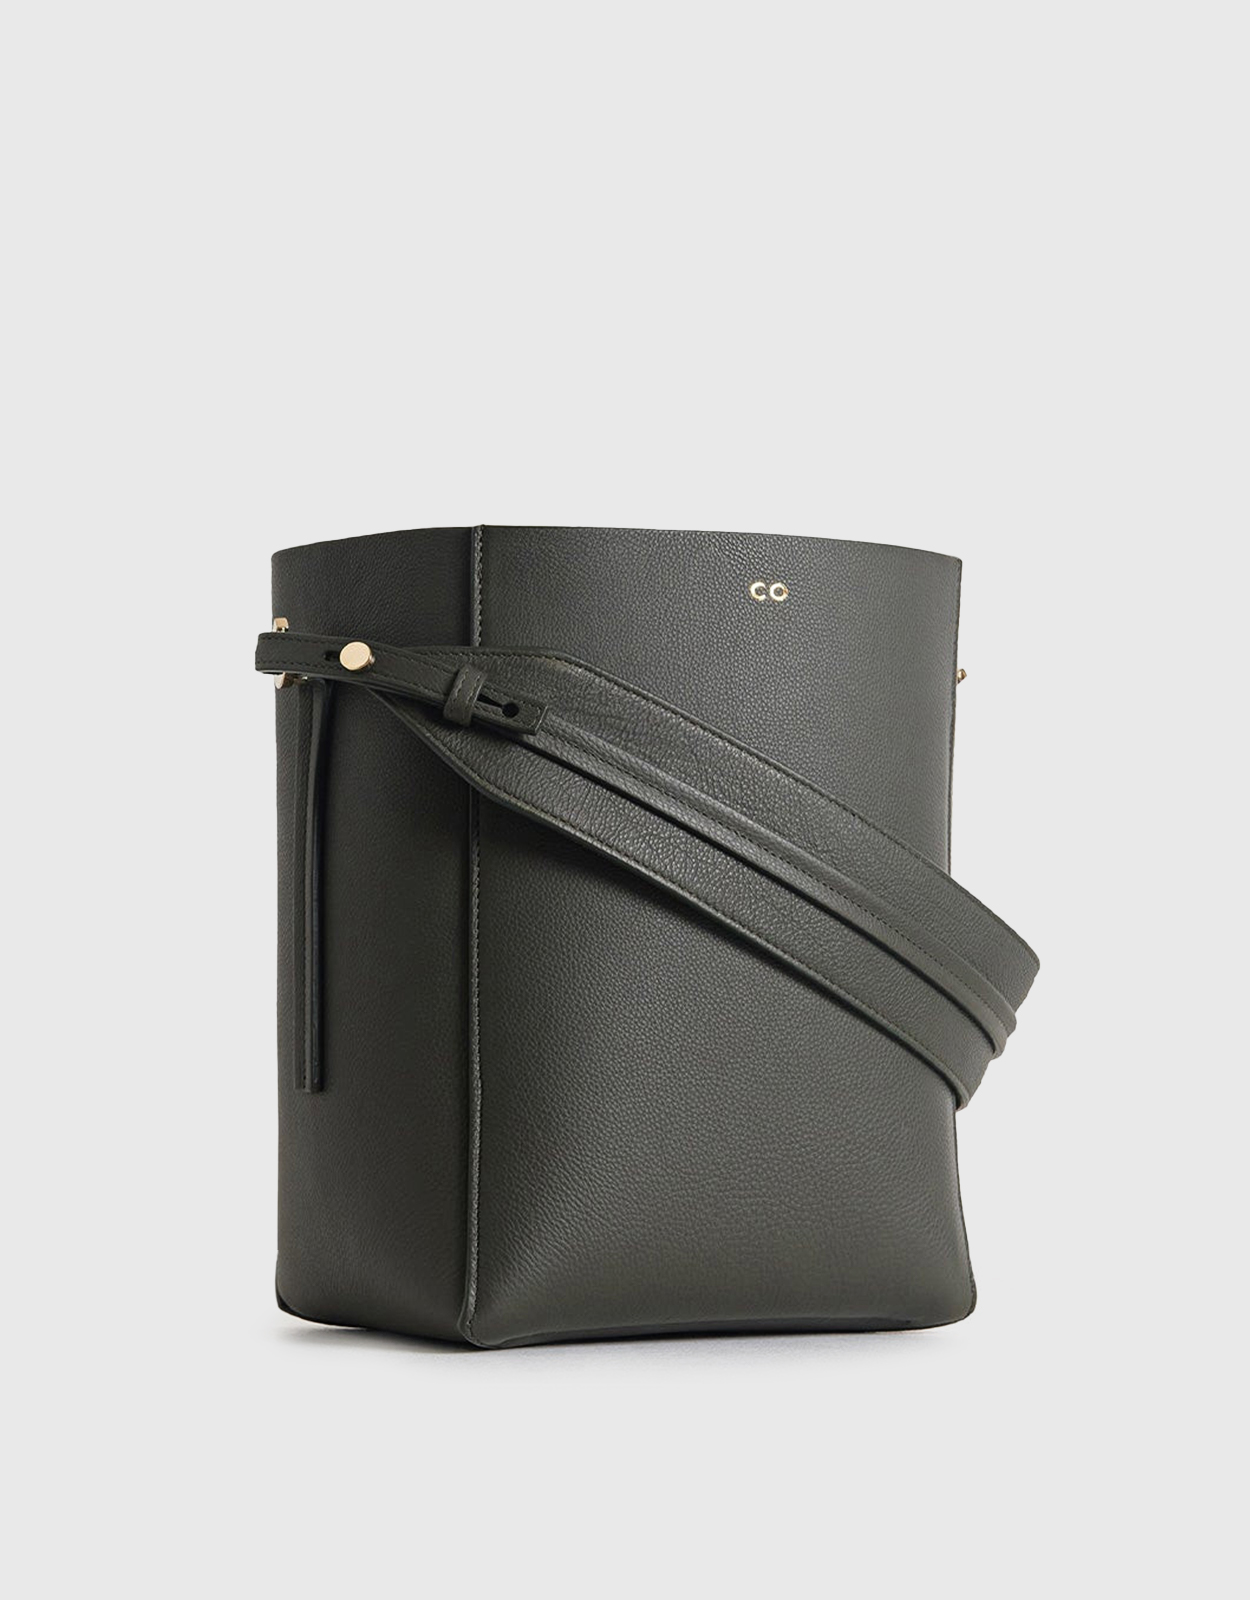 Love Bucket Bags? Check Out Celine's Small Bucket Cuir Triomphe